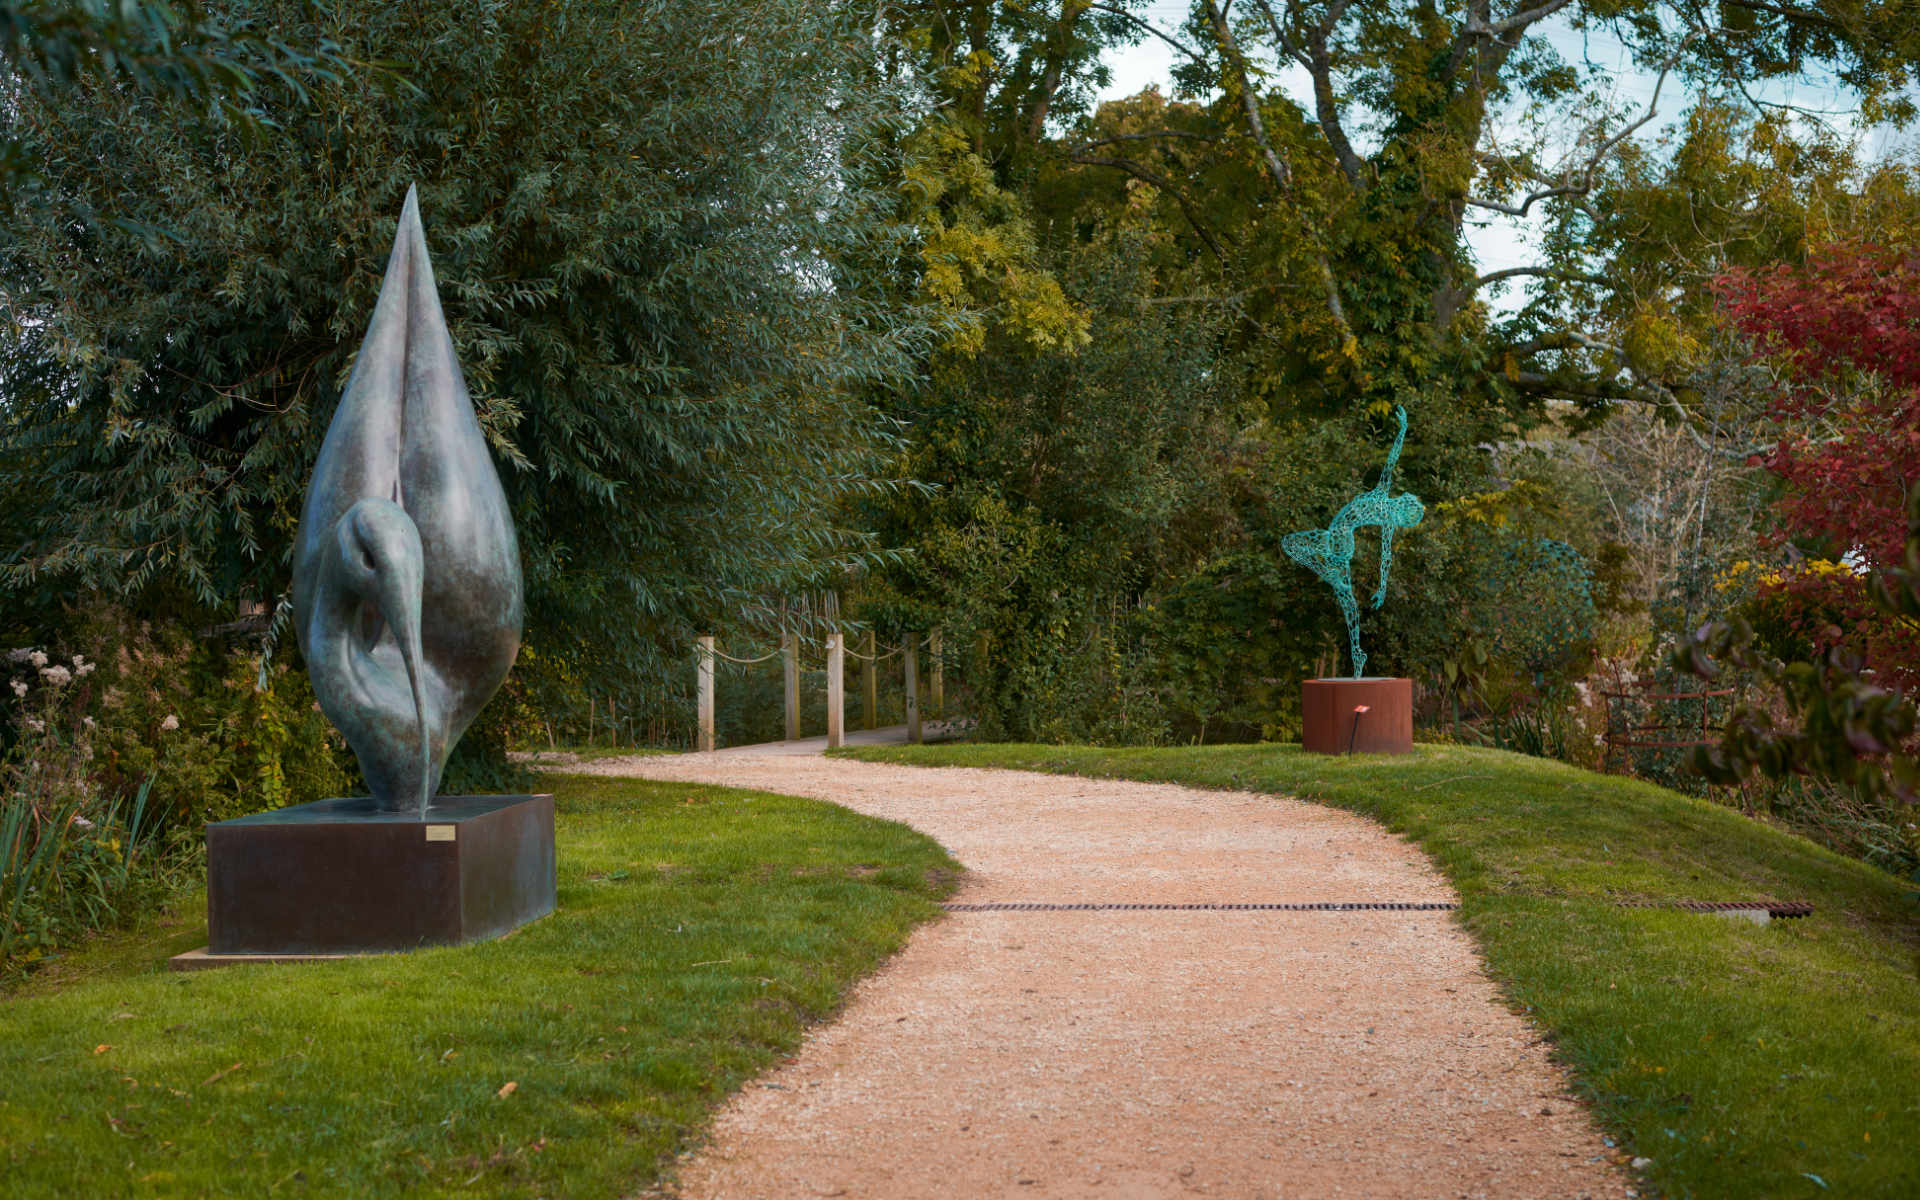 Sculpture By The Lakes